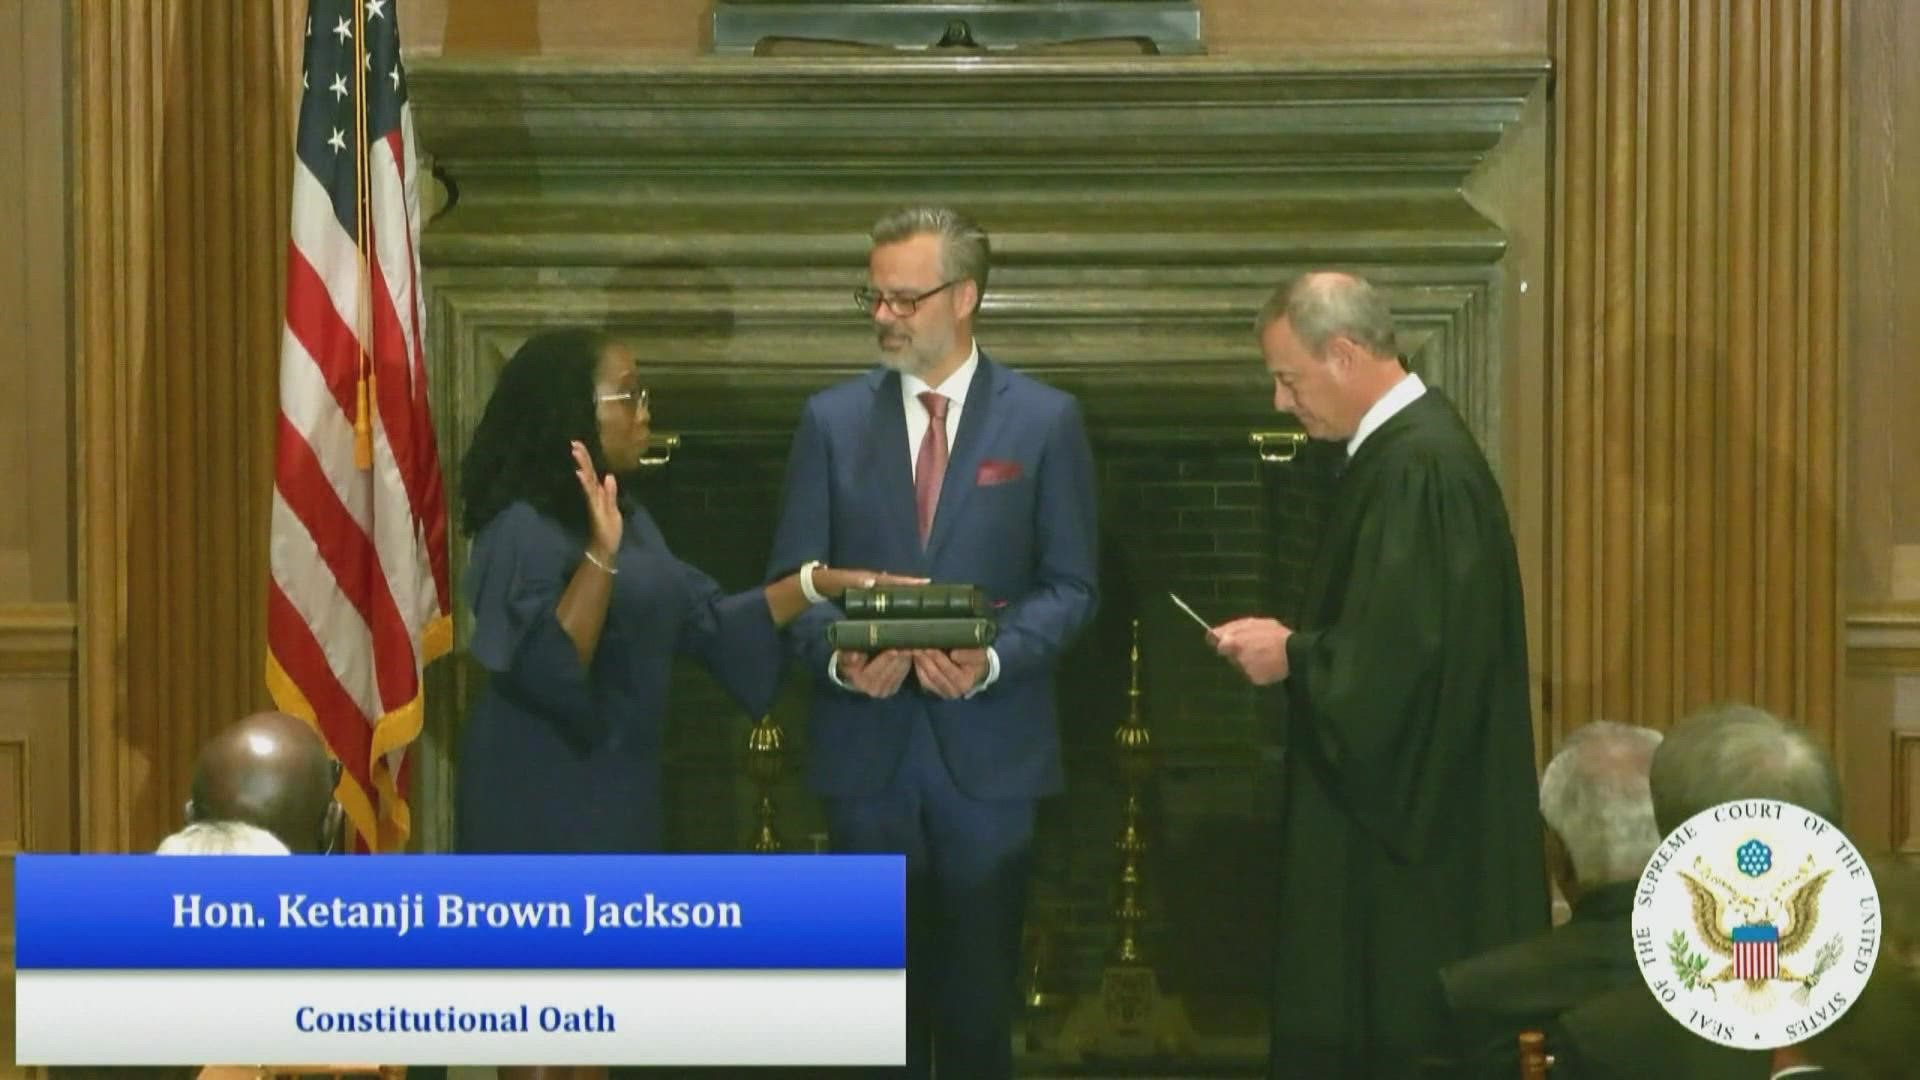 Judge Ketanji Brown Jackson, 51, officially made history Thursday as the first Black woman on the Supreme Court.